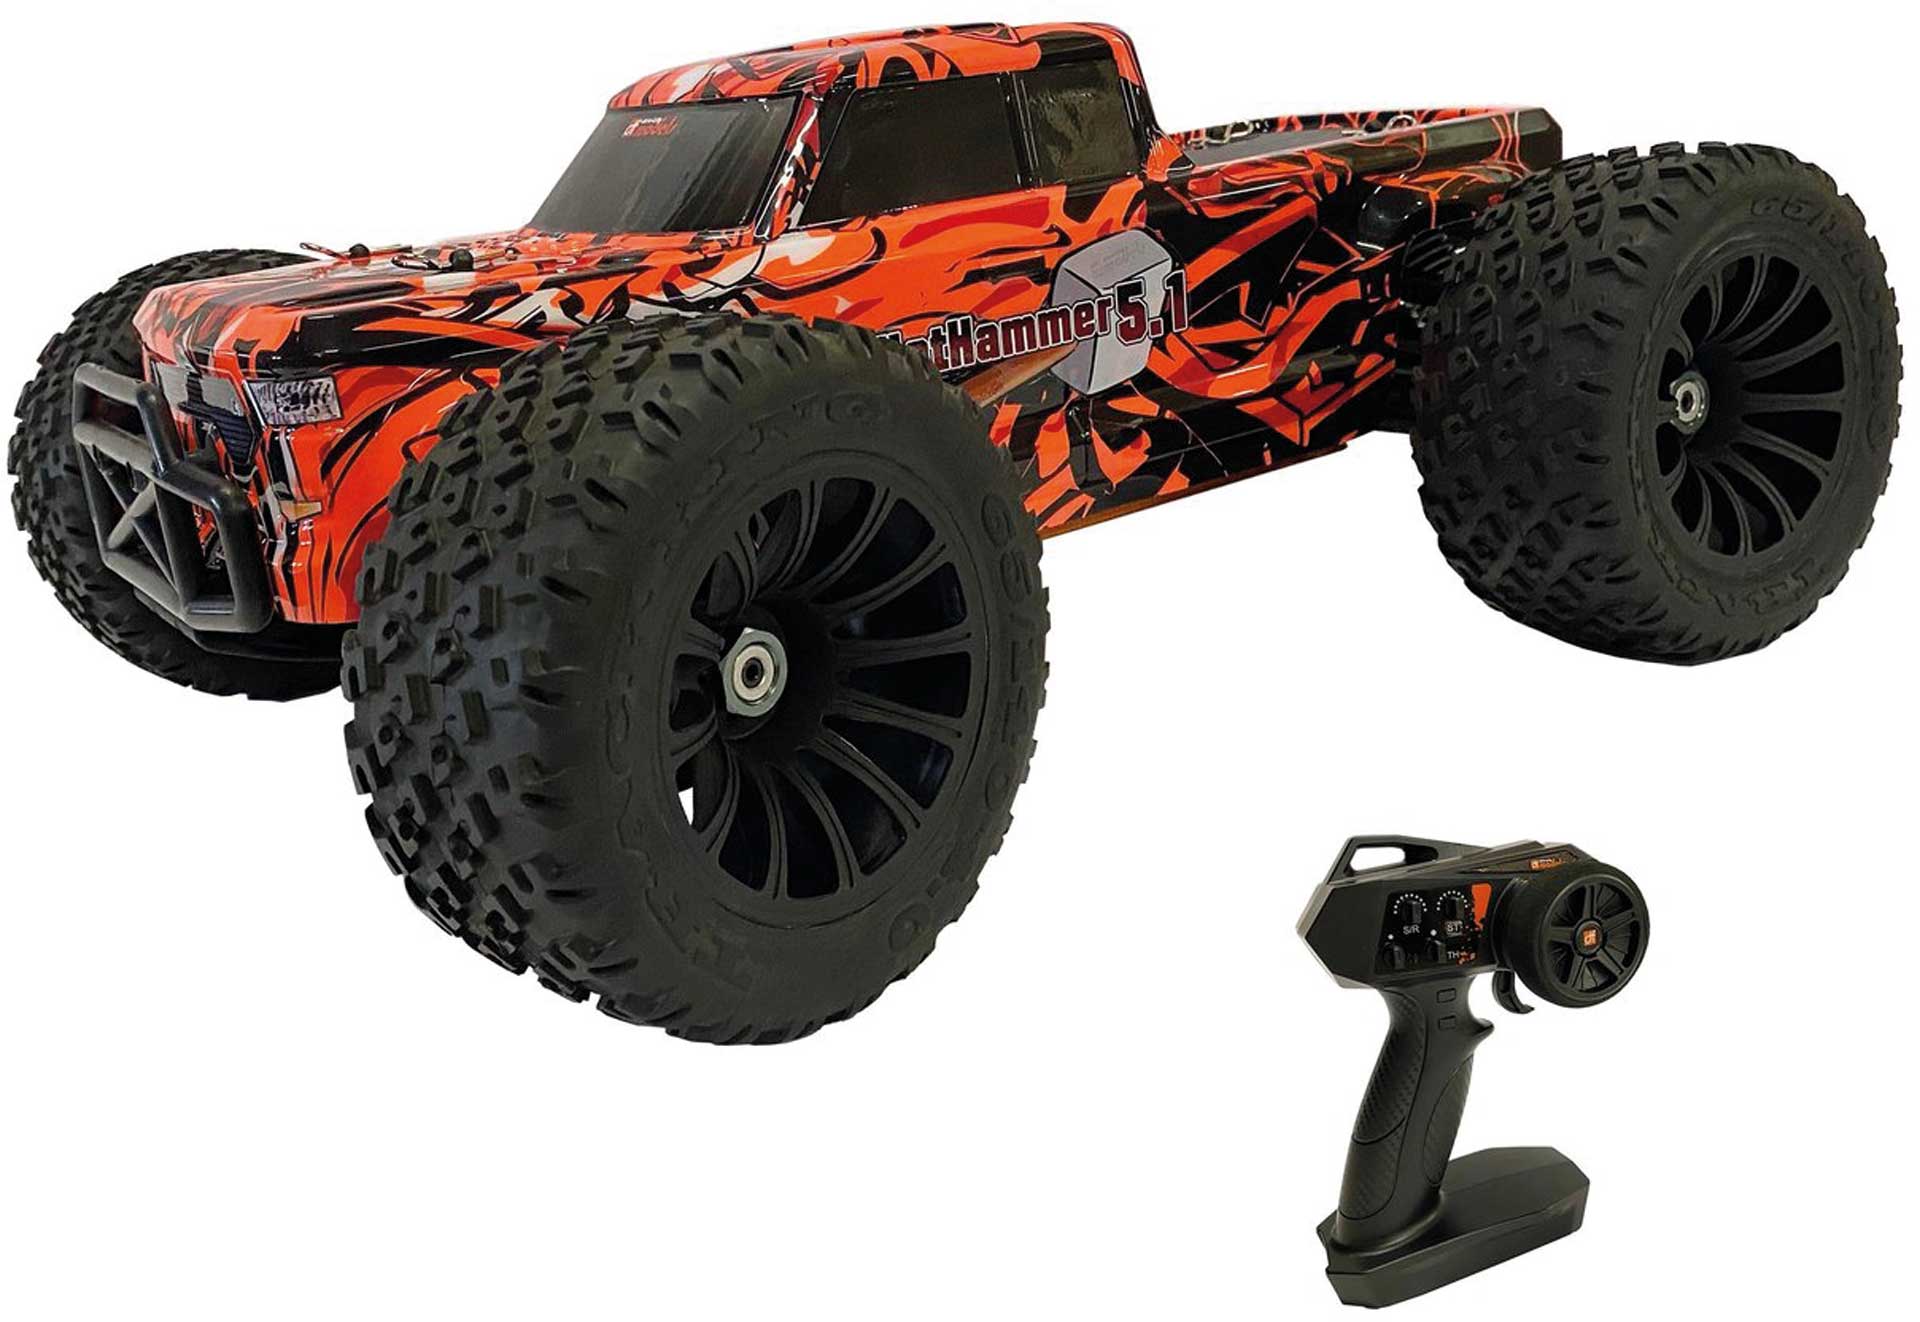 DRIVE & FLY MODELS HotHammer 5.1 COMPETITION Truck BL - brushless RTR